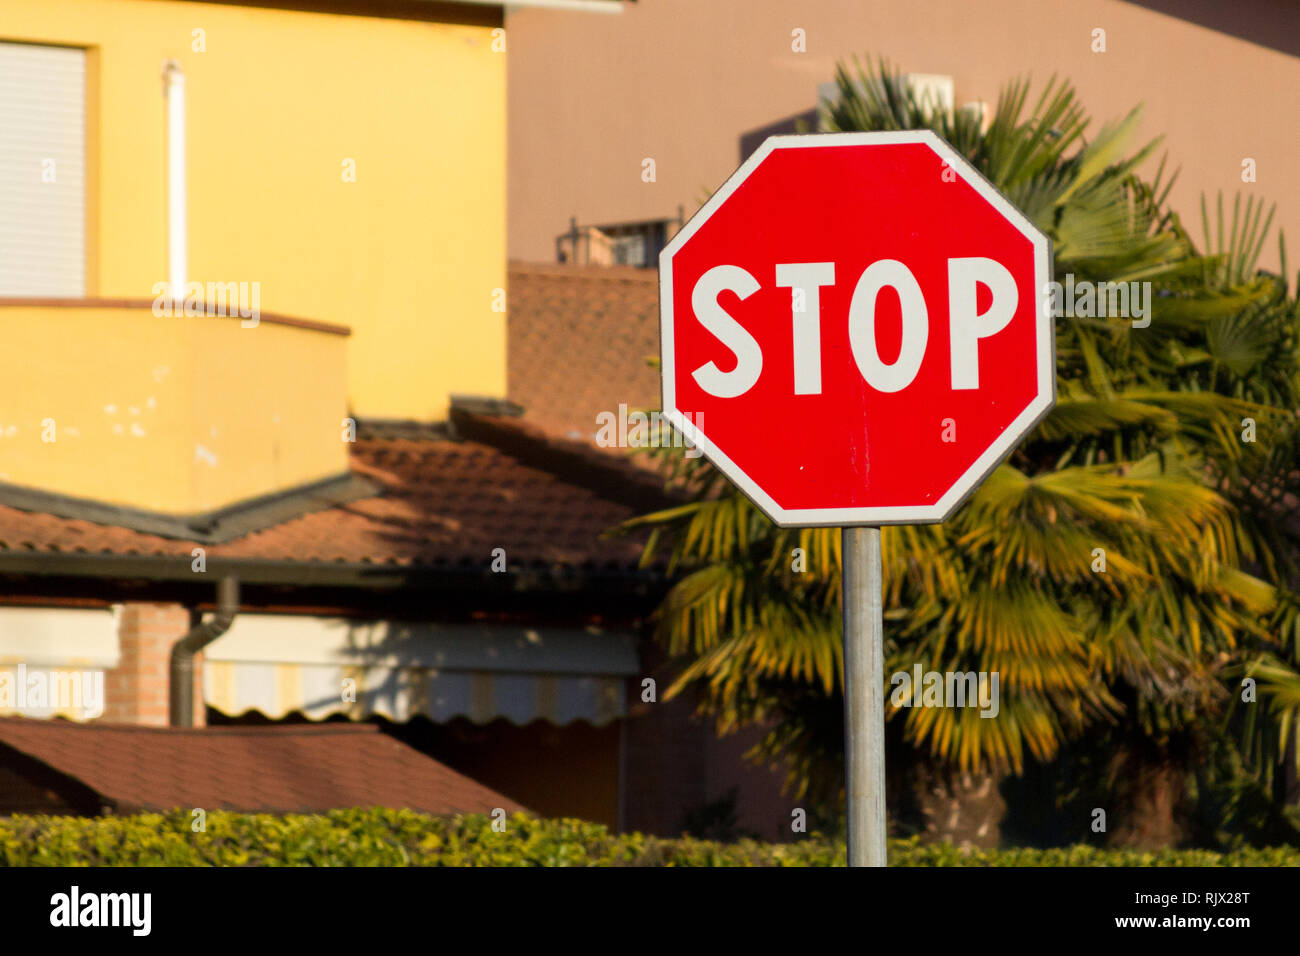 A stop sign in a street Stock Photo